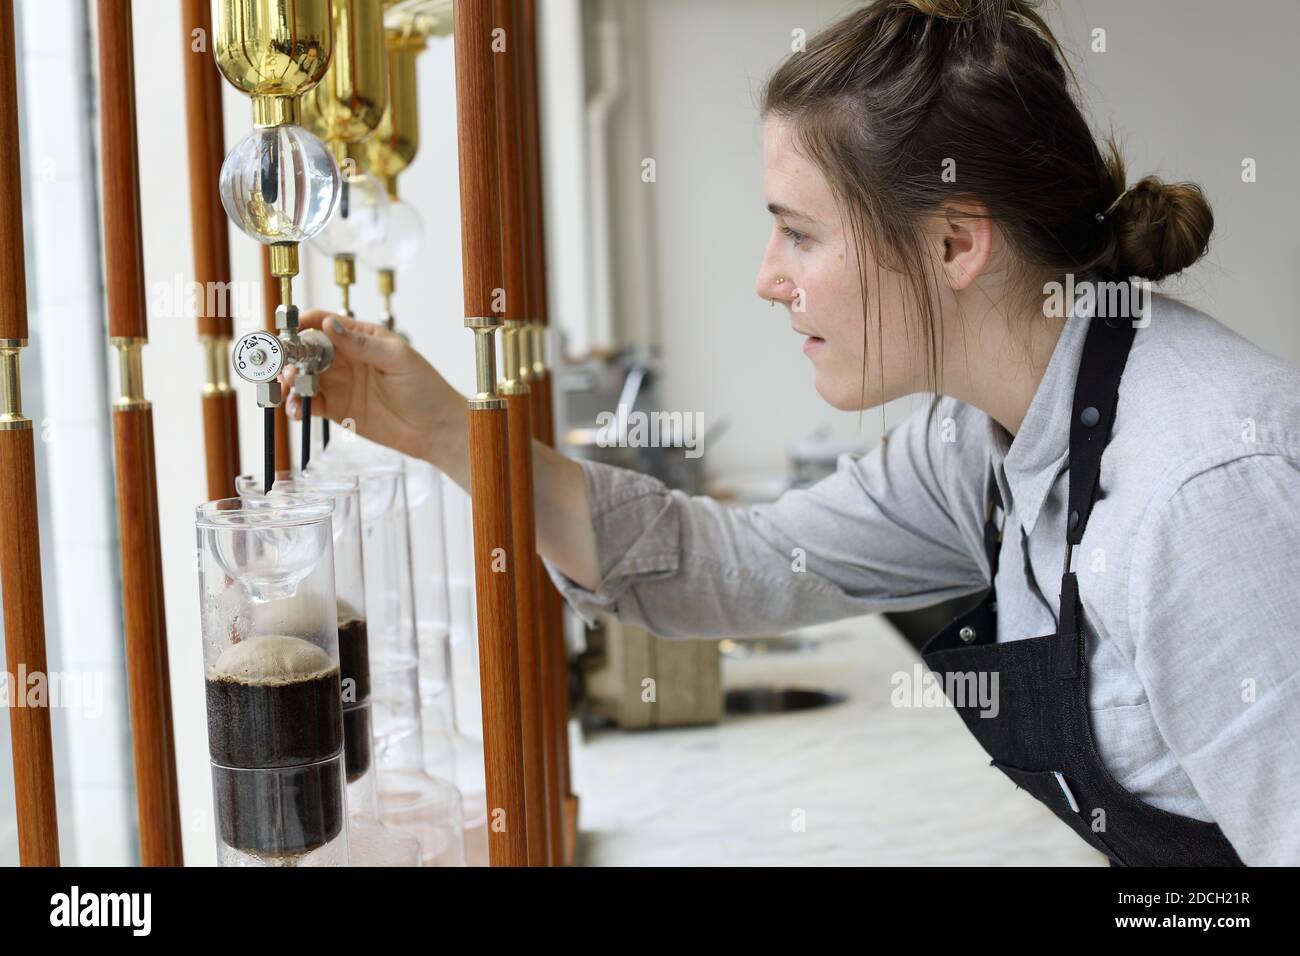 https://c8.alamy.com/comp/2DCH21R/united-states-california-san-francisco-female-barista-with-japanese-slow-dripper-with-brass-columns-glass-vessels-at-blue-bottle-coffee-2DCH21R.jpg